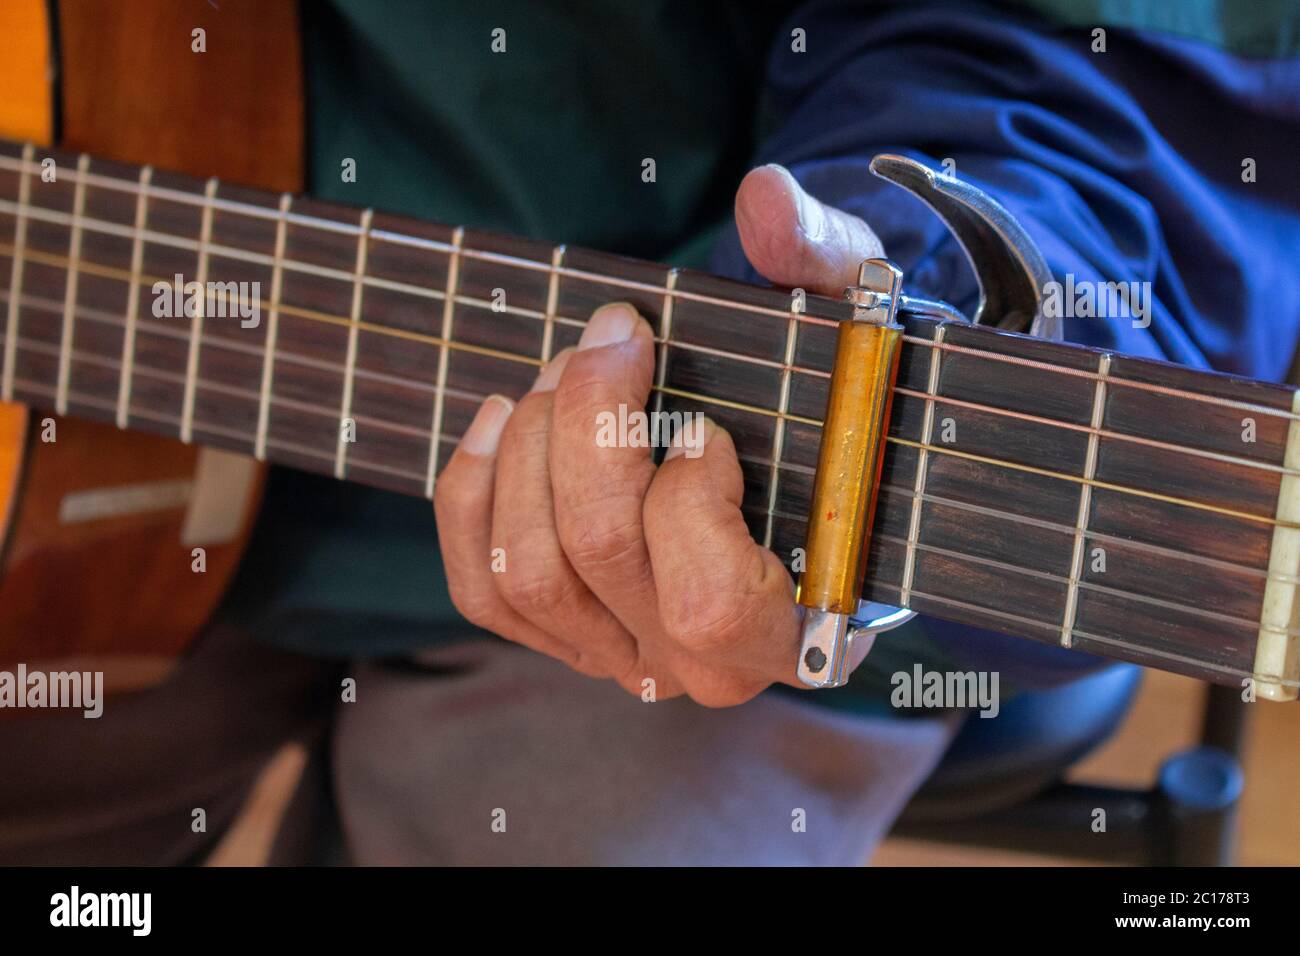 Approach to the left hand of an elderly man sitting playing a guitar dressed in a blue shirt Stock Photo